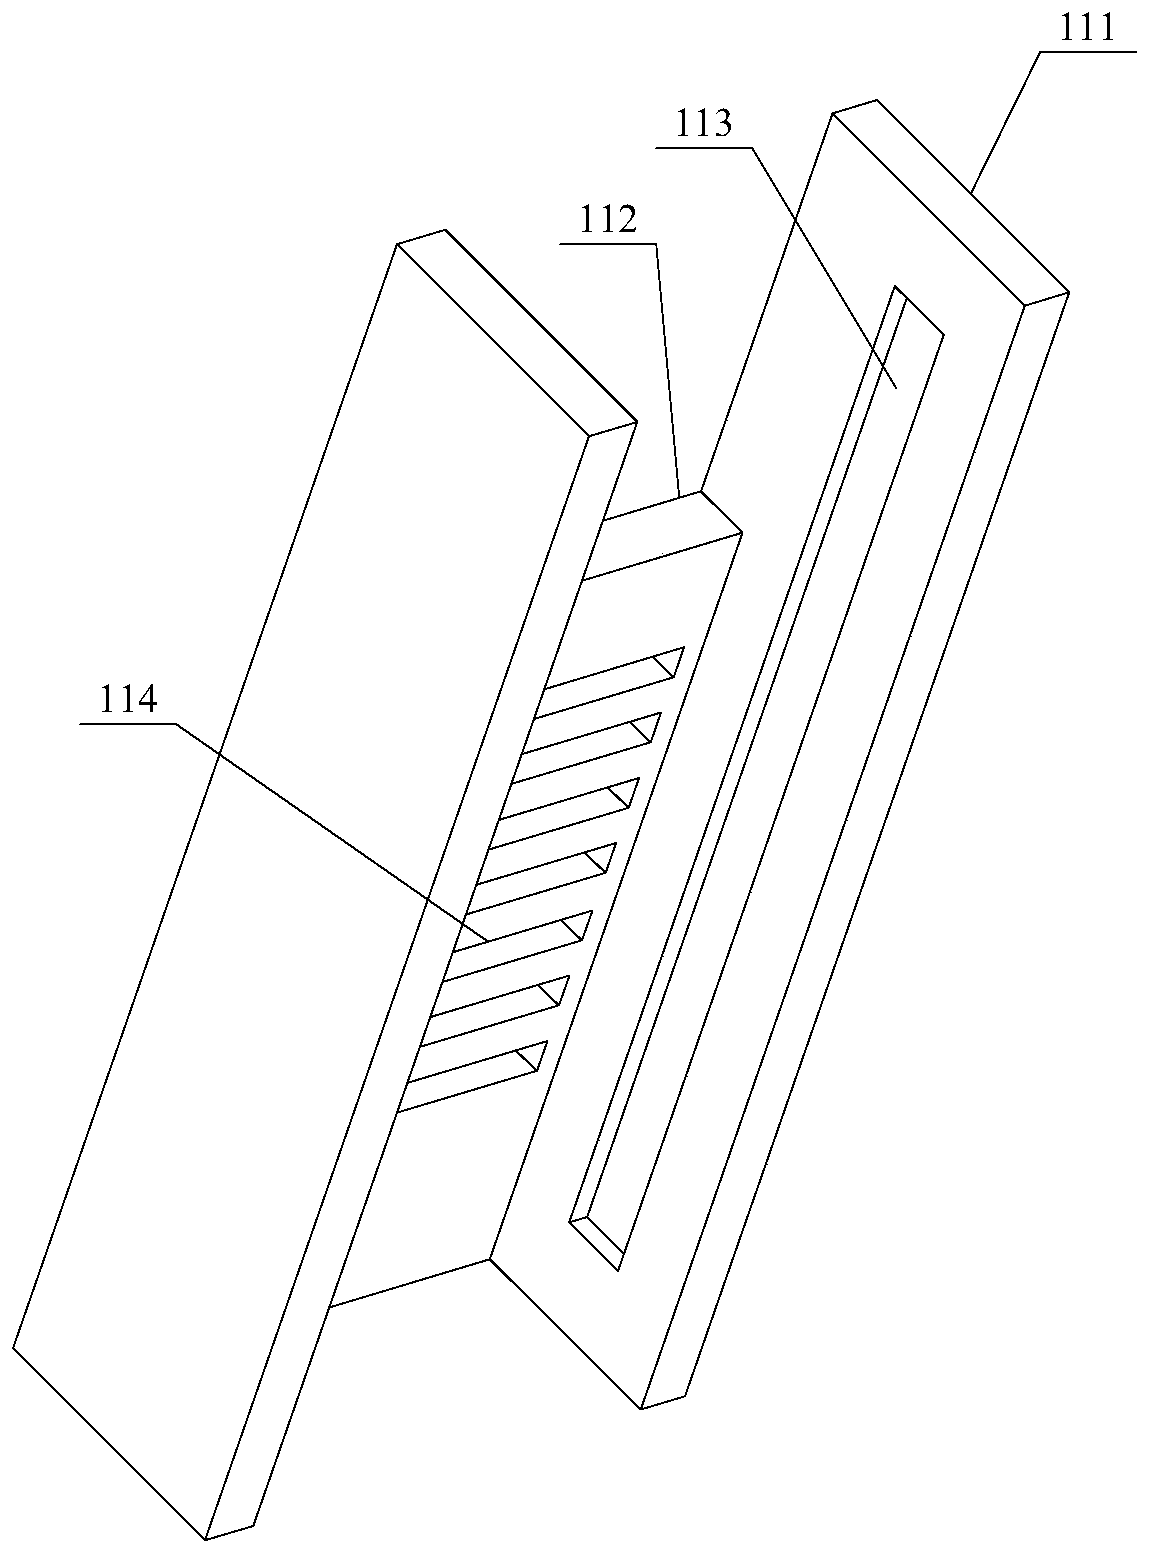 Supporting device for civil bridge construction